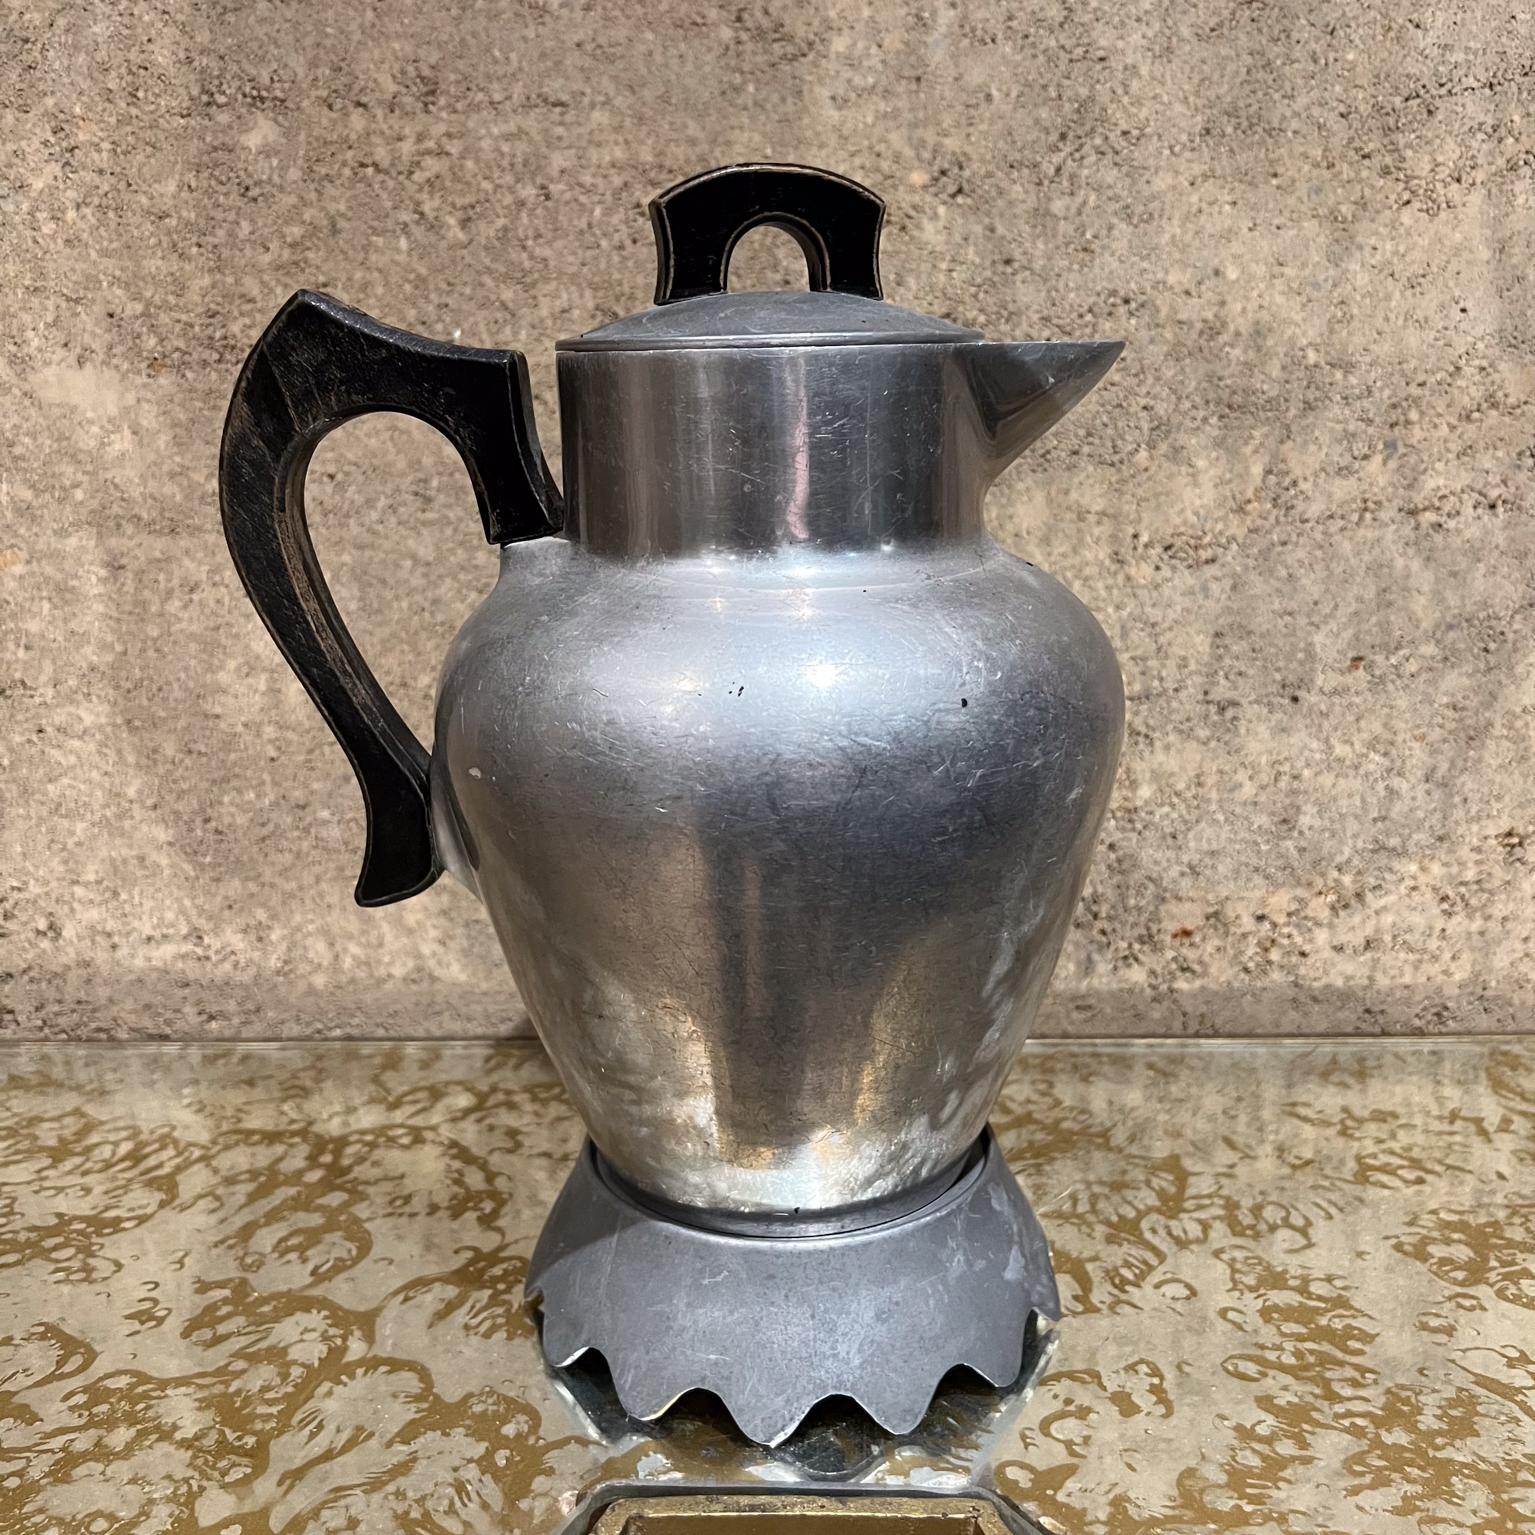 1940s Club Personal Service Coffee Pot Aluminum Ware
Wood Handle
Clear logo present
11.5 h x 8.5 d x 6.5 diameter
Preowned original unrestored vintage condition
Refer to all images provided.